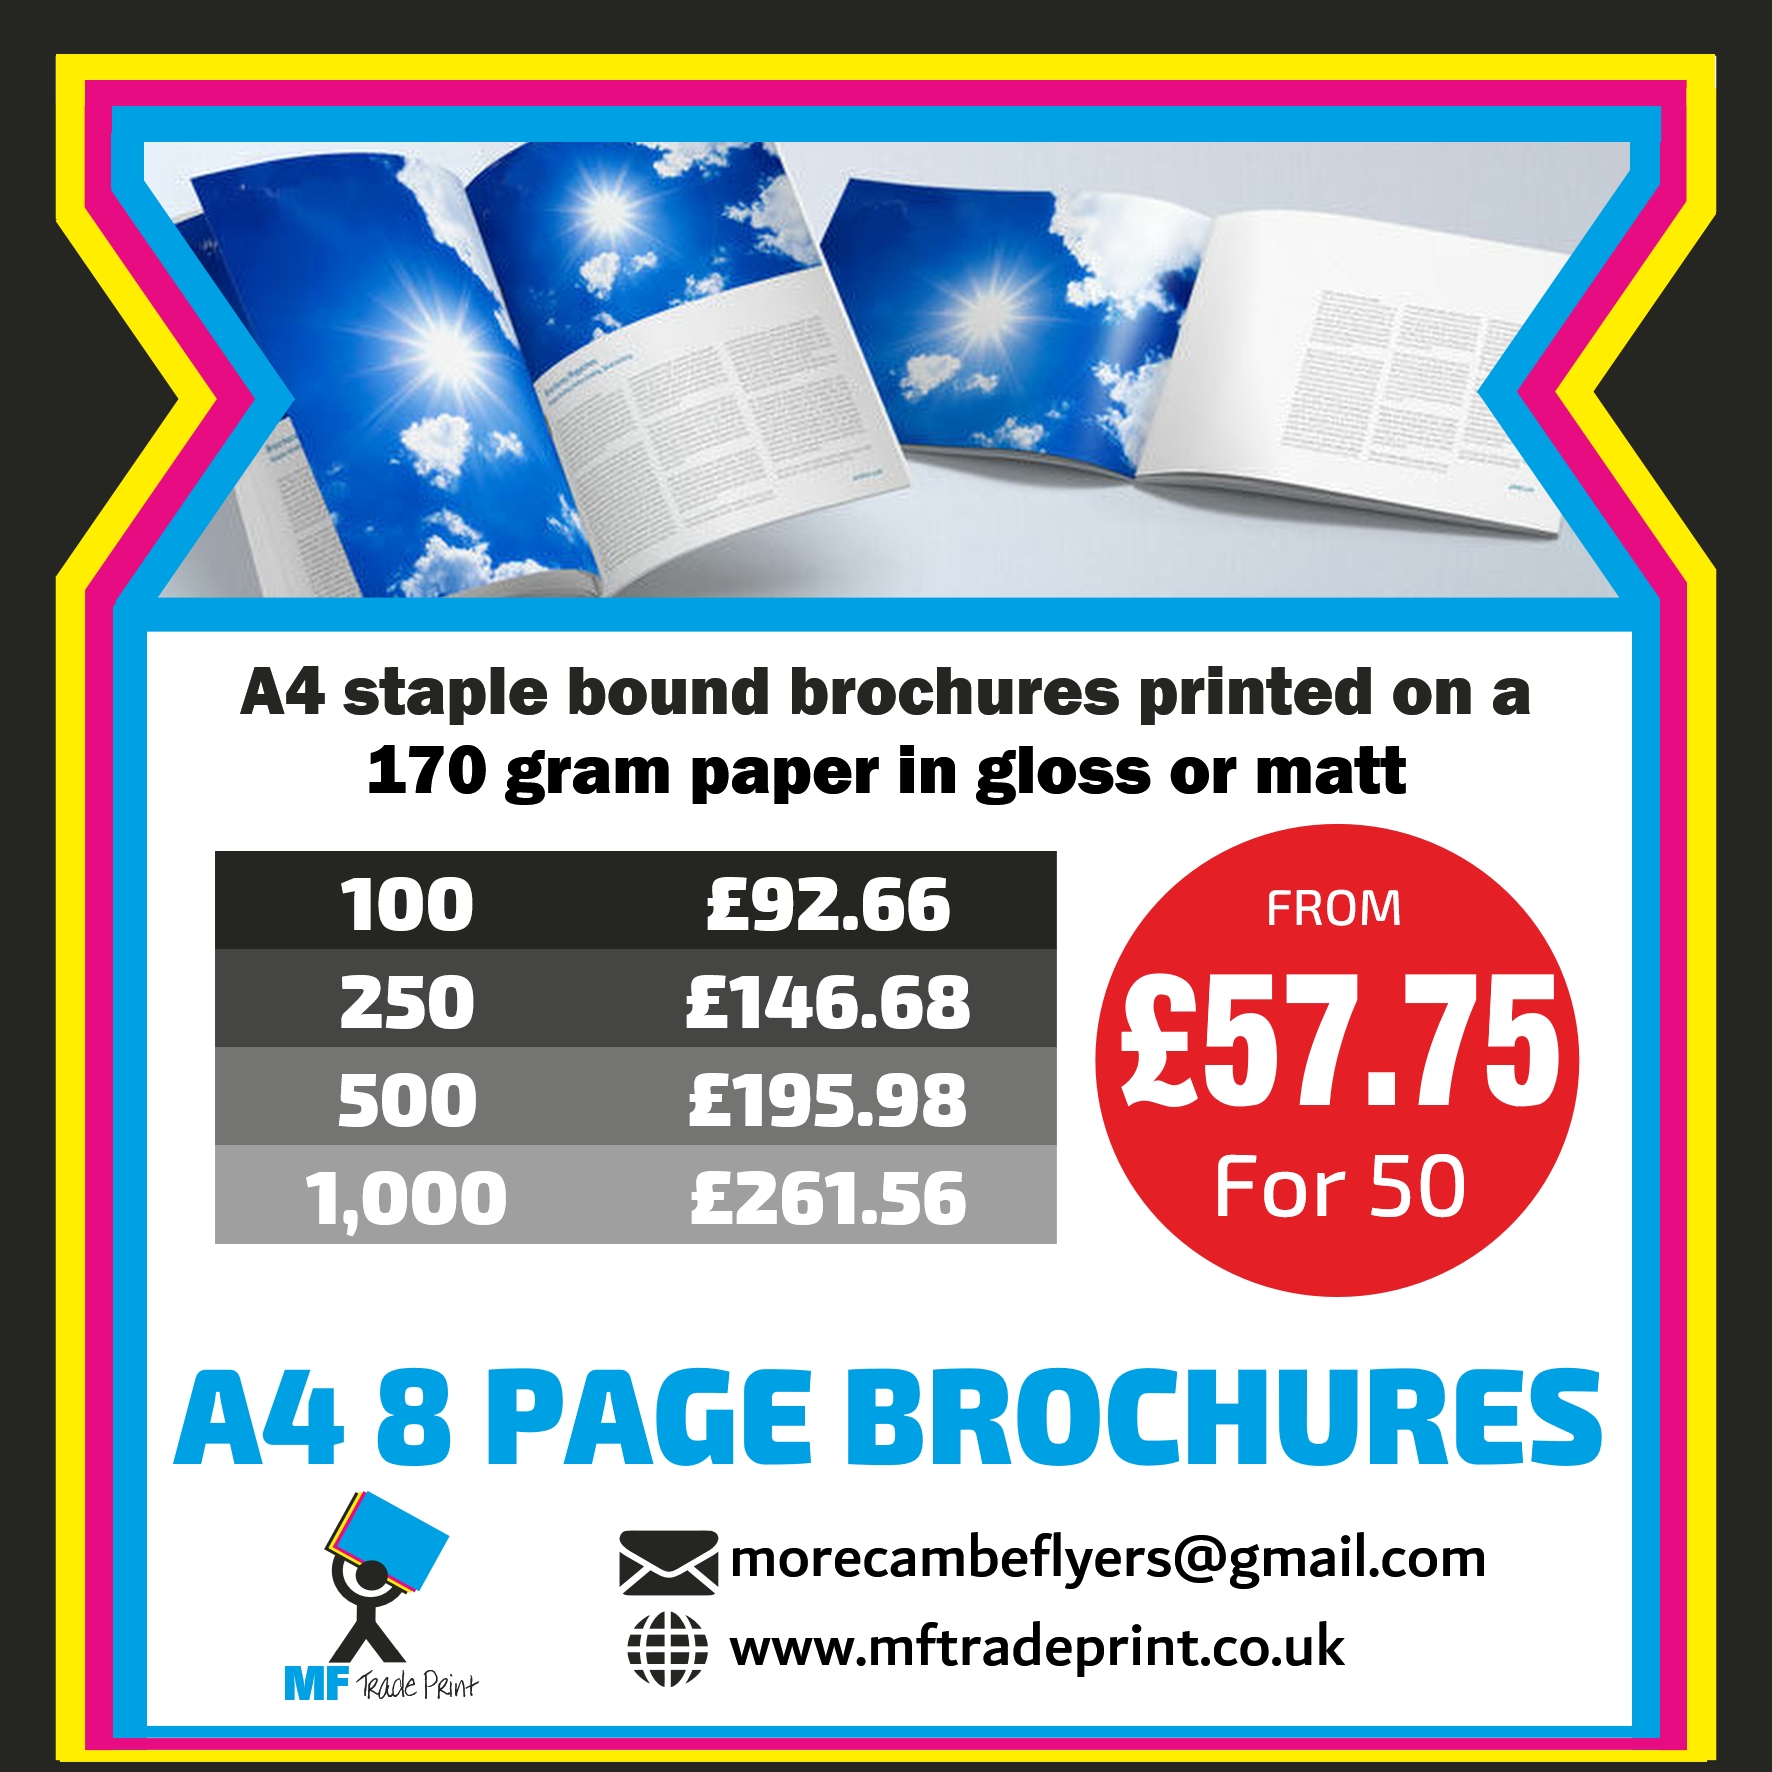 A4 full colour printed brochures staple bound